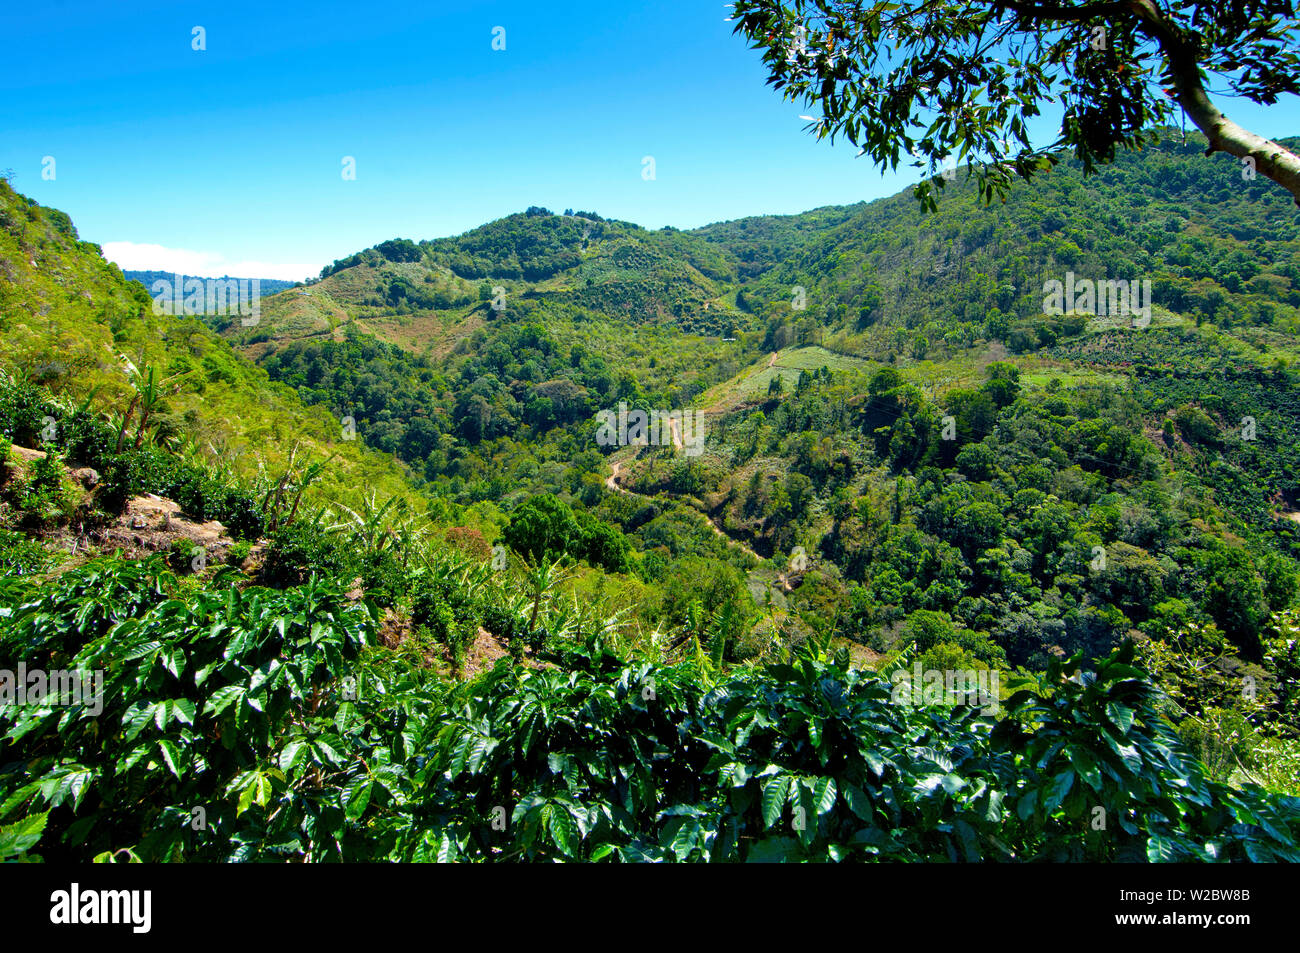 Costa Rica, San Marcos de Tarrazu, Area Known For Its High Quality Coffee Stock Photo